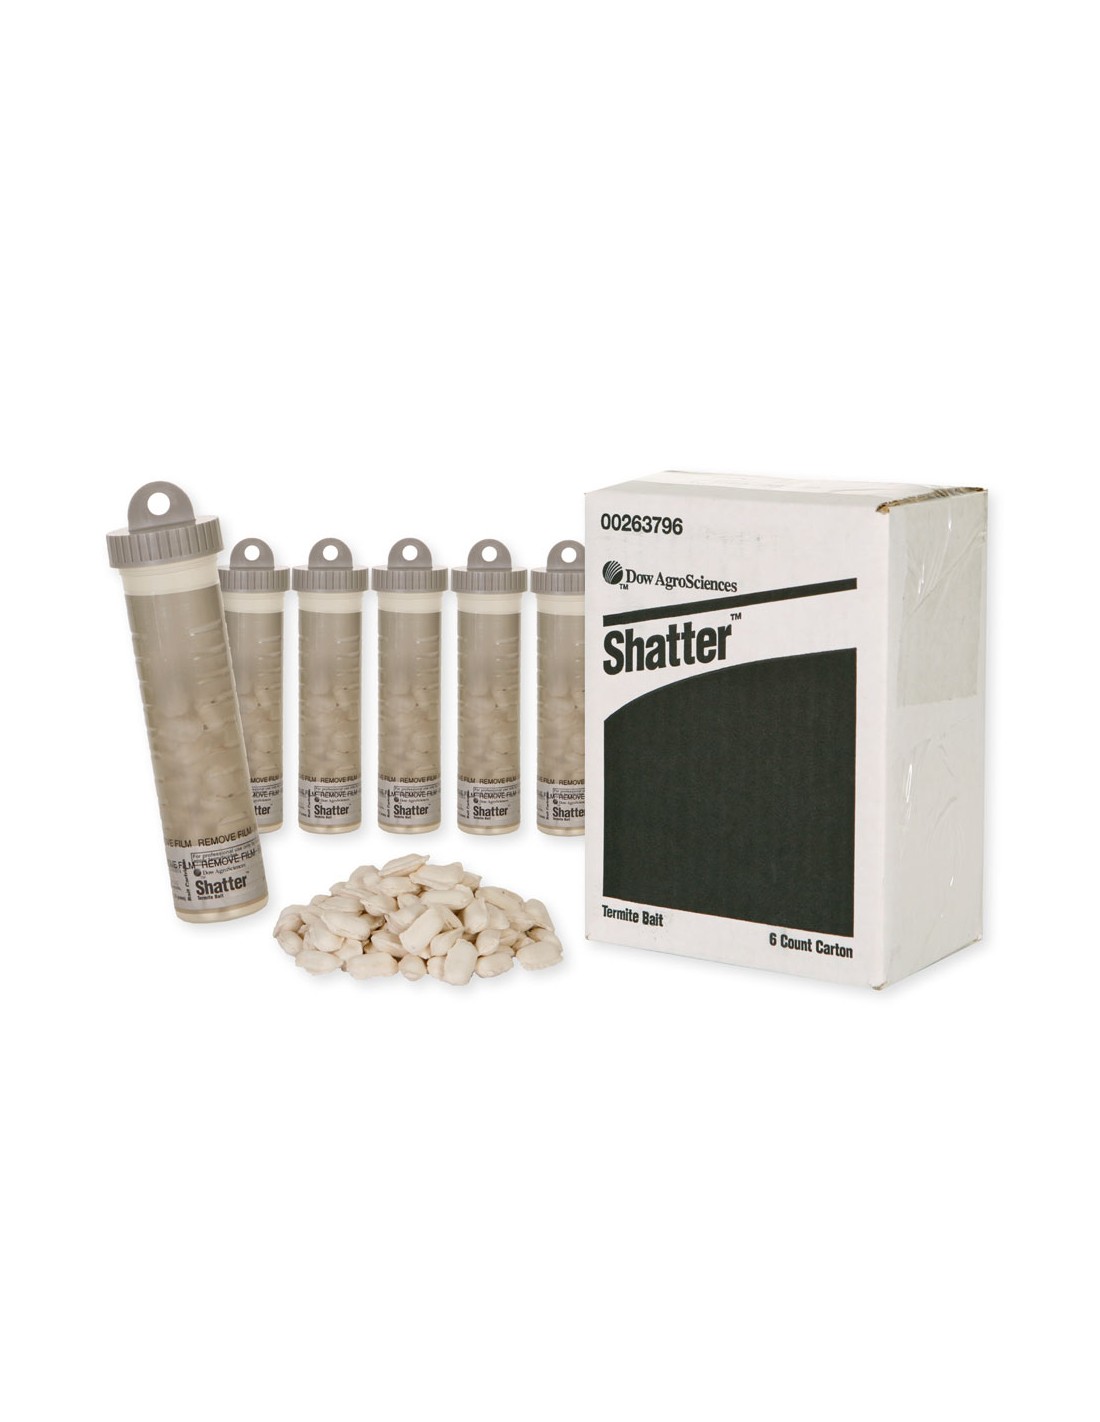 I'm leaning toward the Hex Pro Termite Bait System. Will the Sentricon tech confiscate the old bait stations?